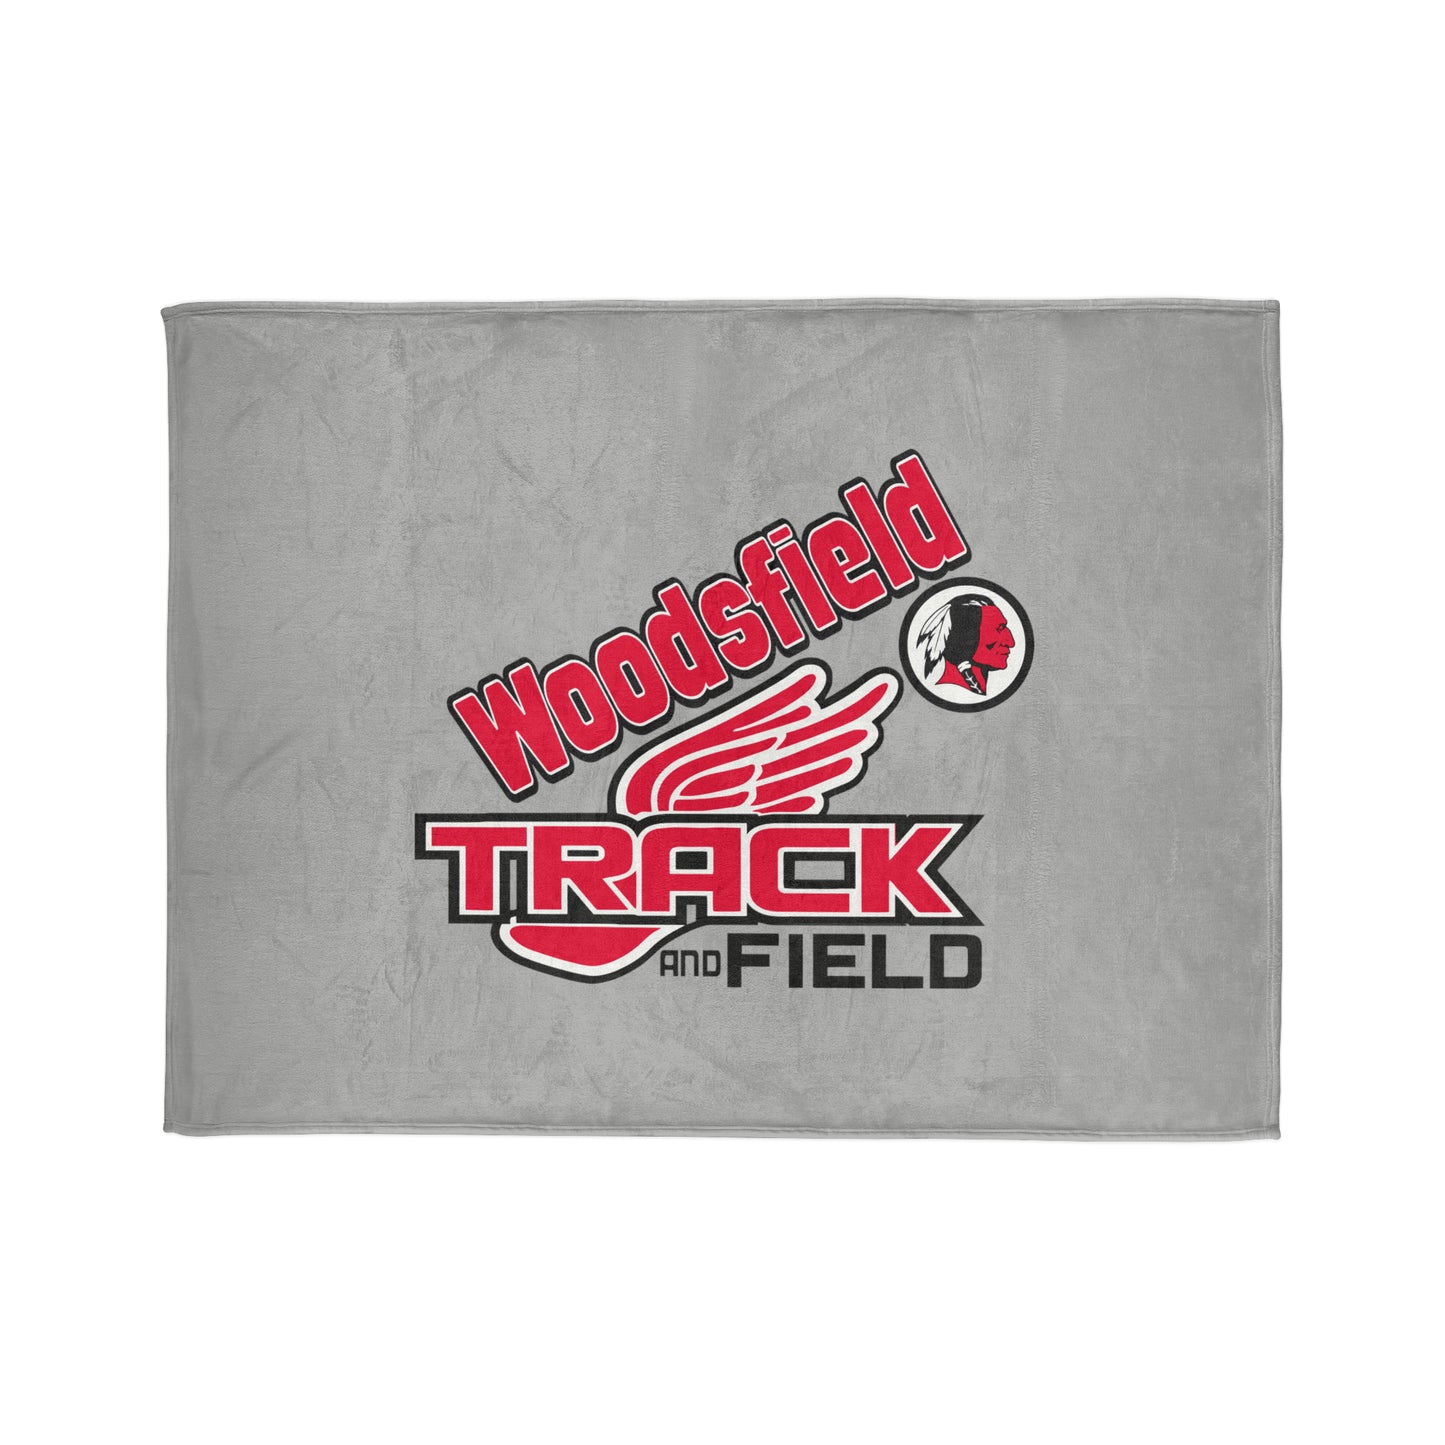 Soft Polyester Blanket - Wdsf Track 2